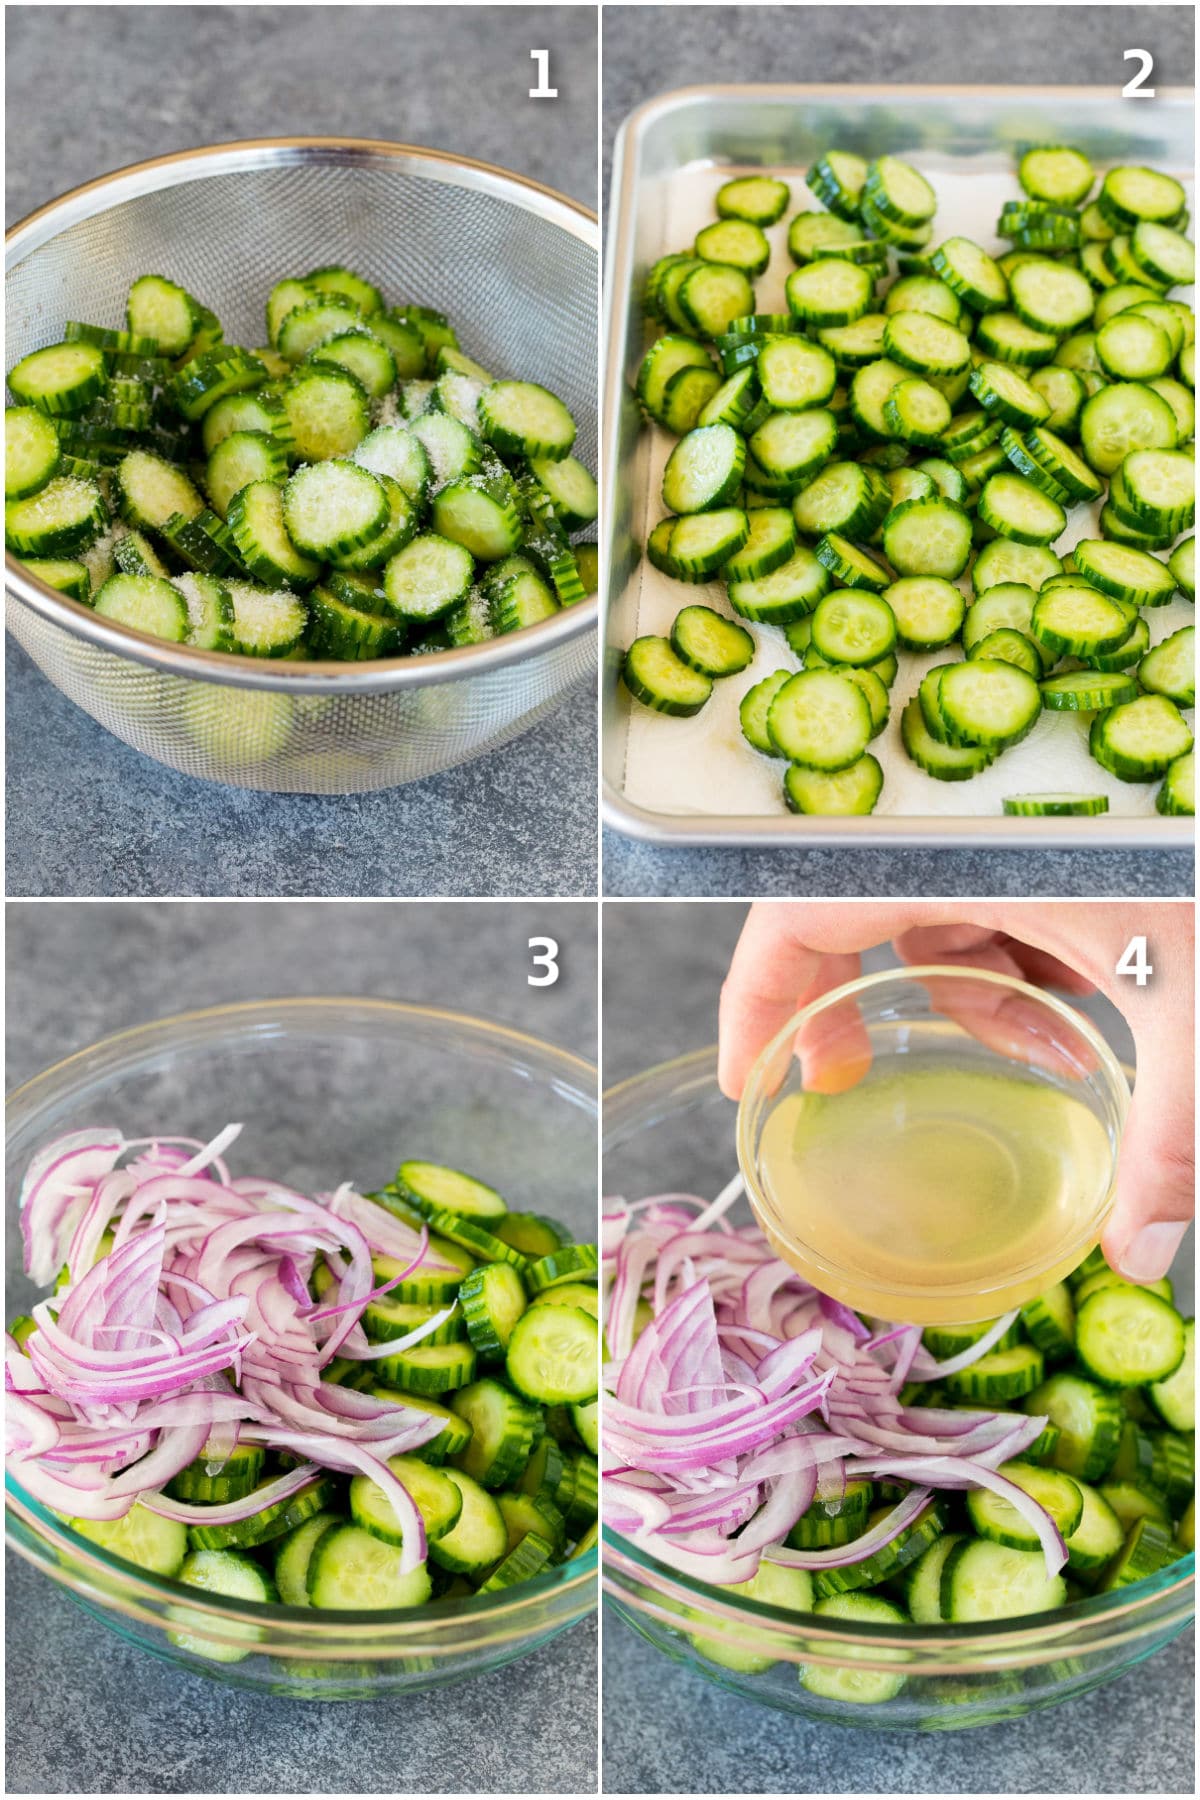 Step by step shots showing how to make Thai cucumber salad.